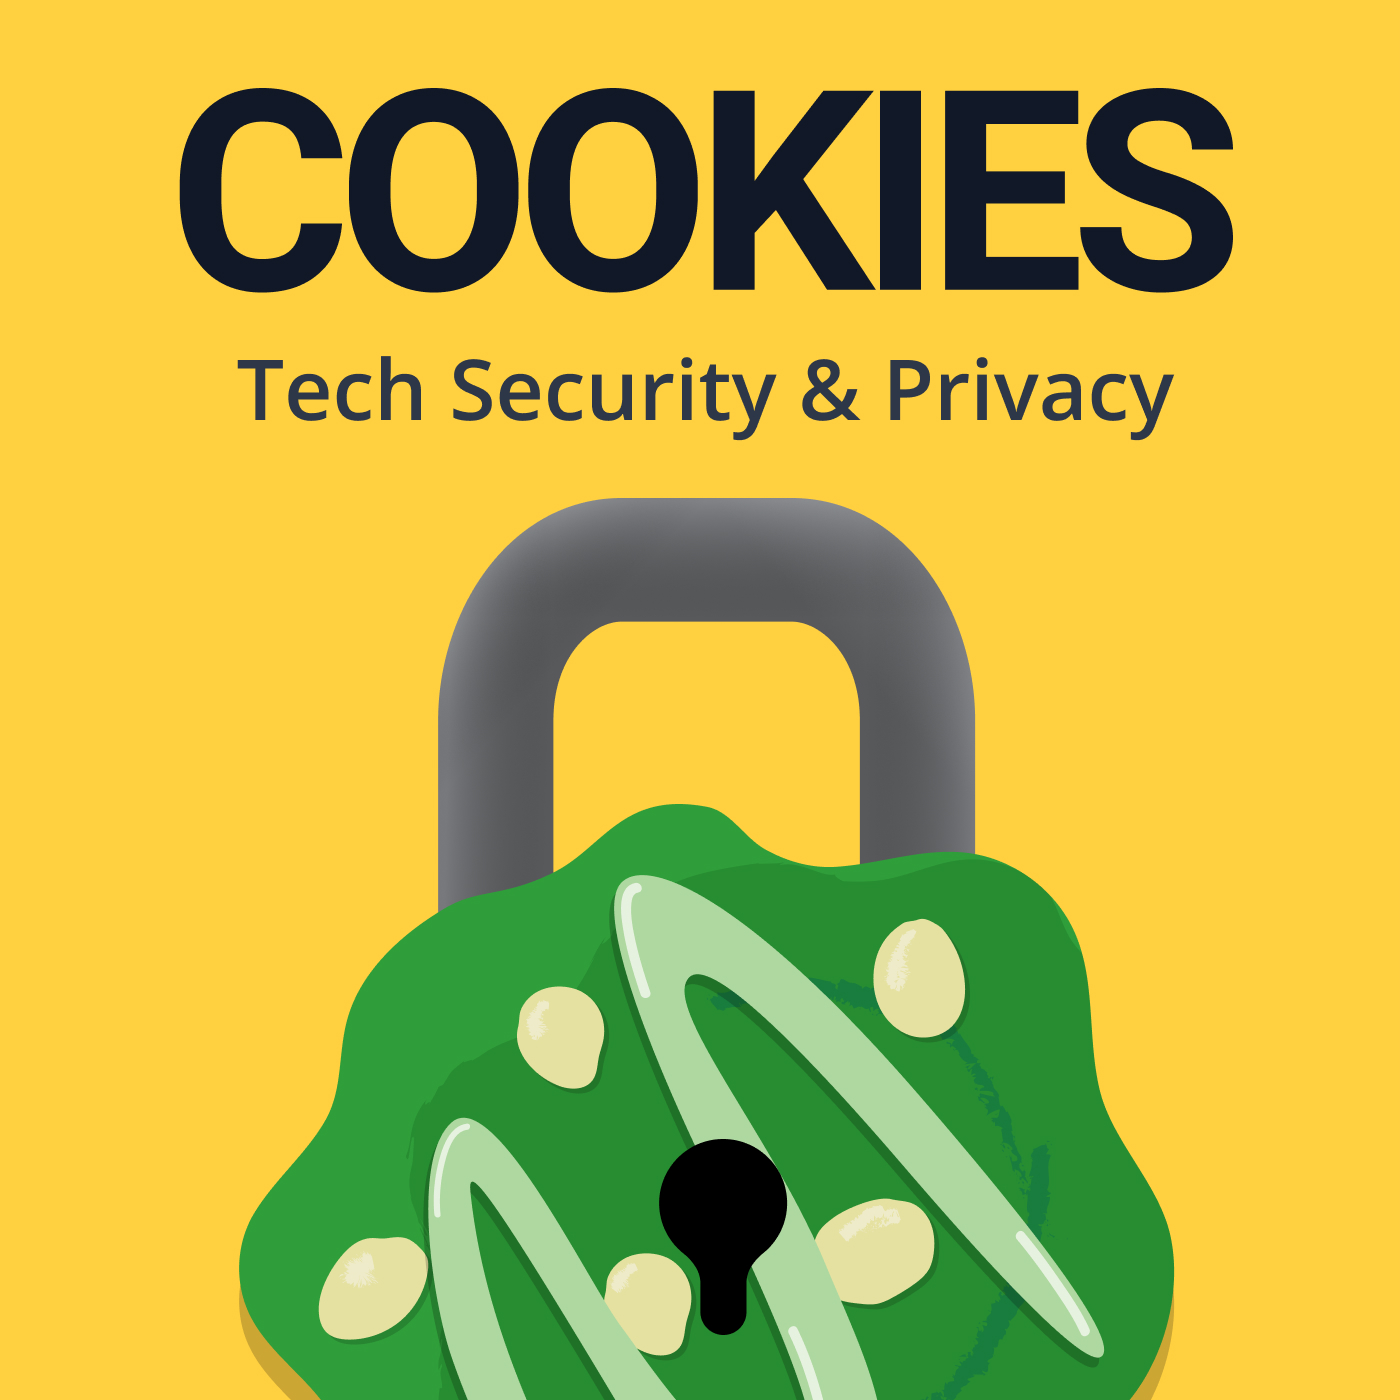 Welcome to Season 2 of Cookies: Tech Security & Privacy!